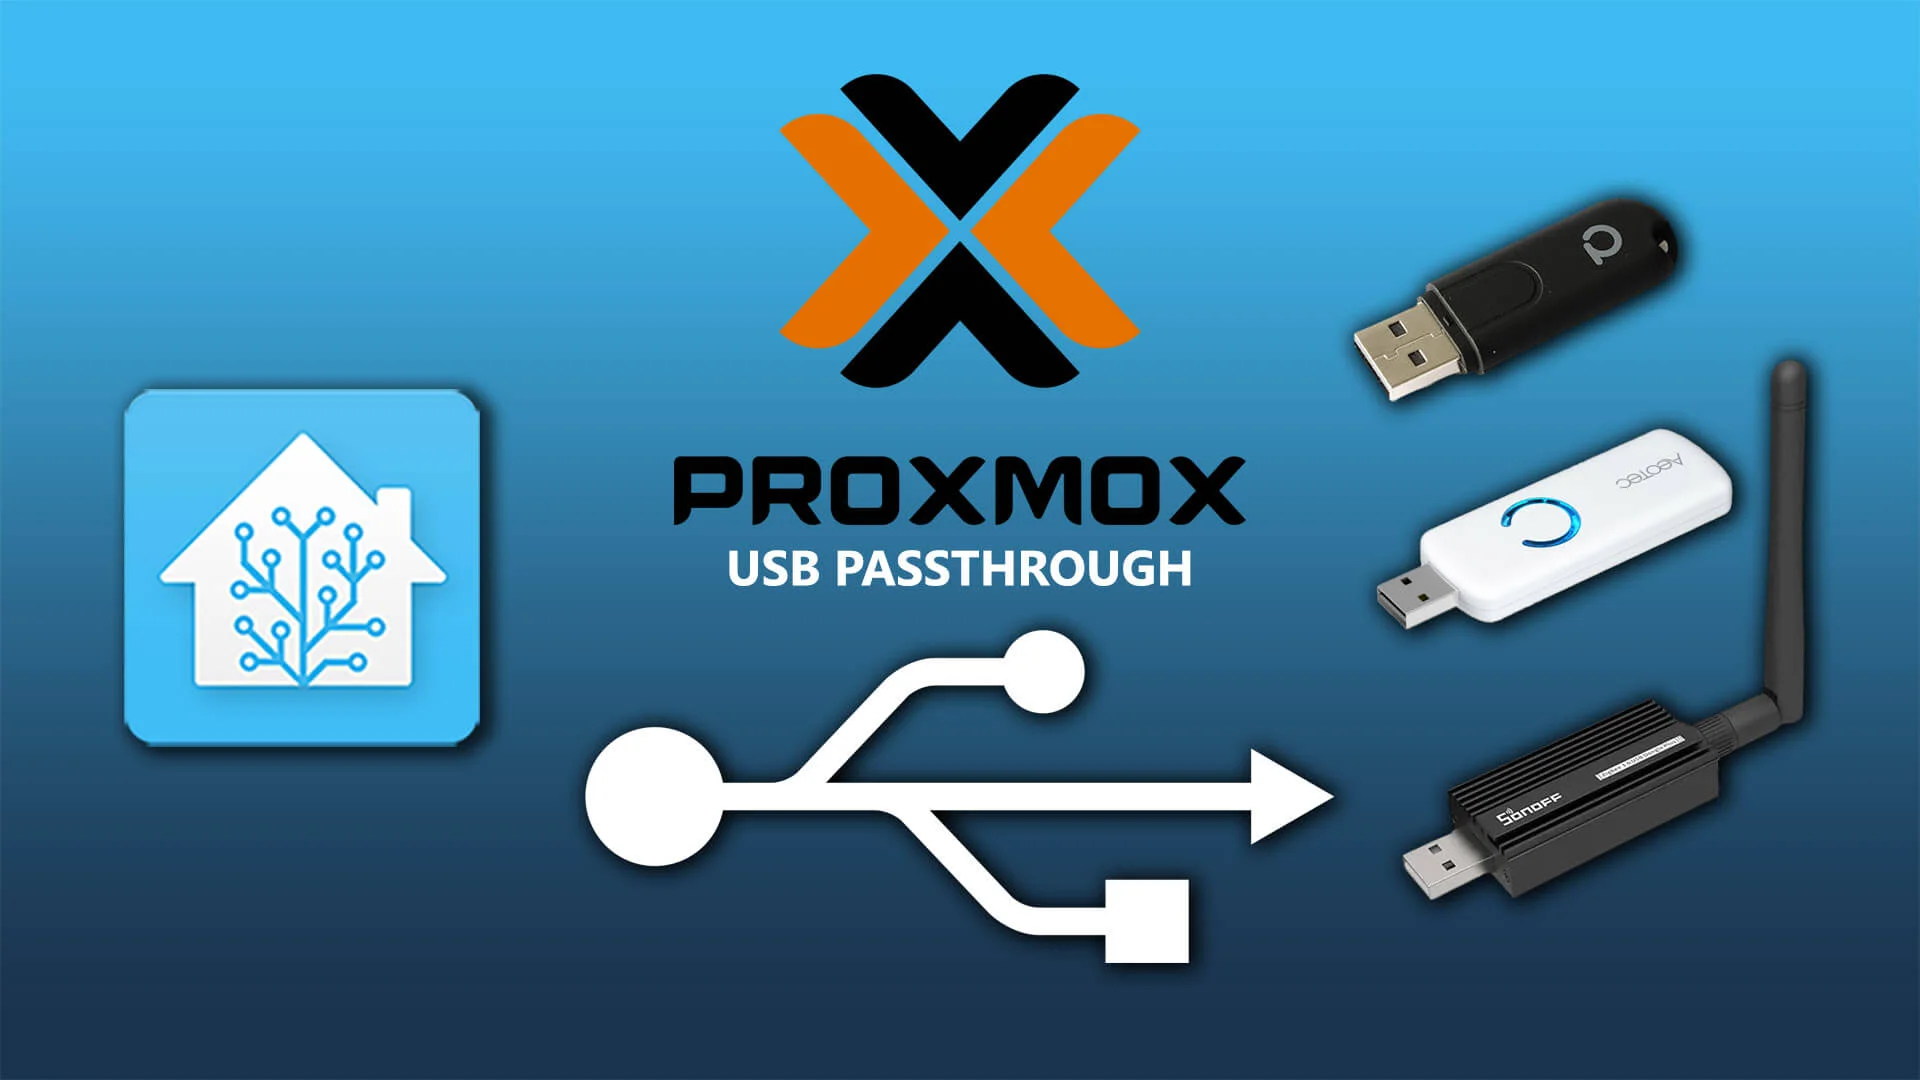 USB Passthrough Proxmox Home Assistant Featured